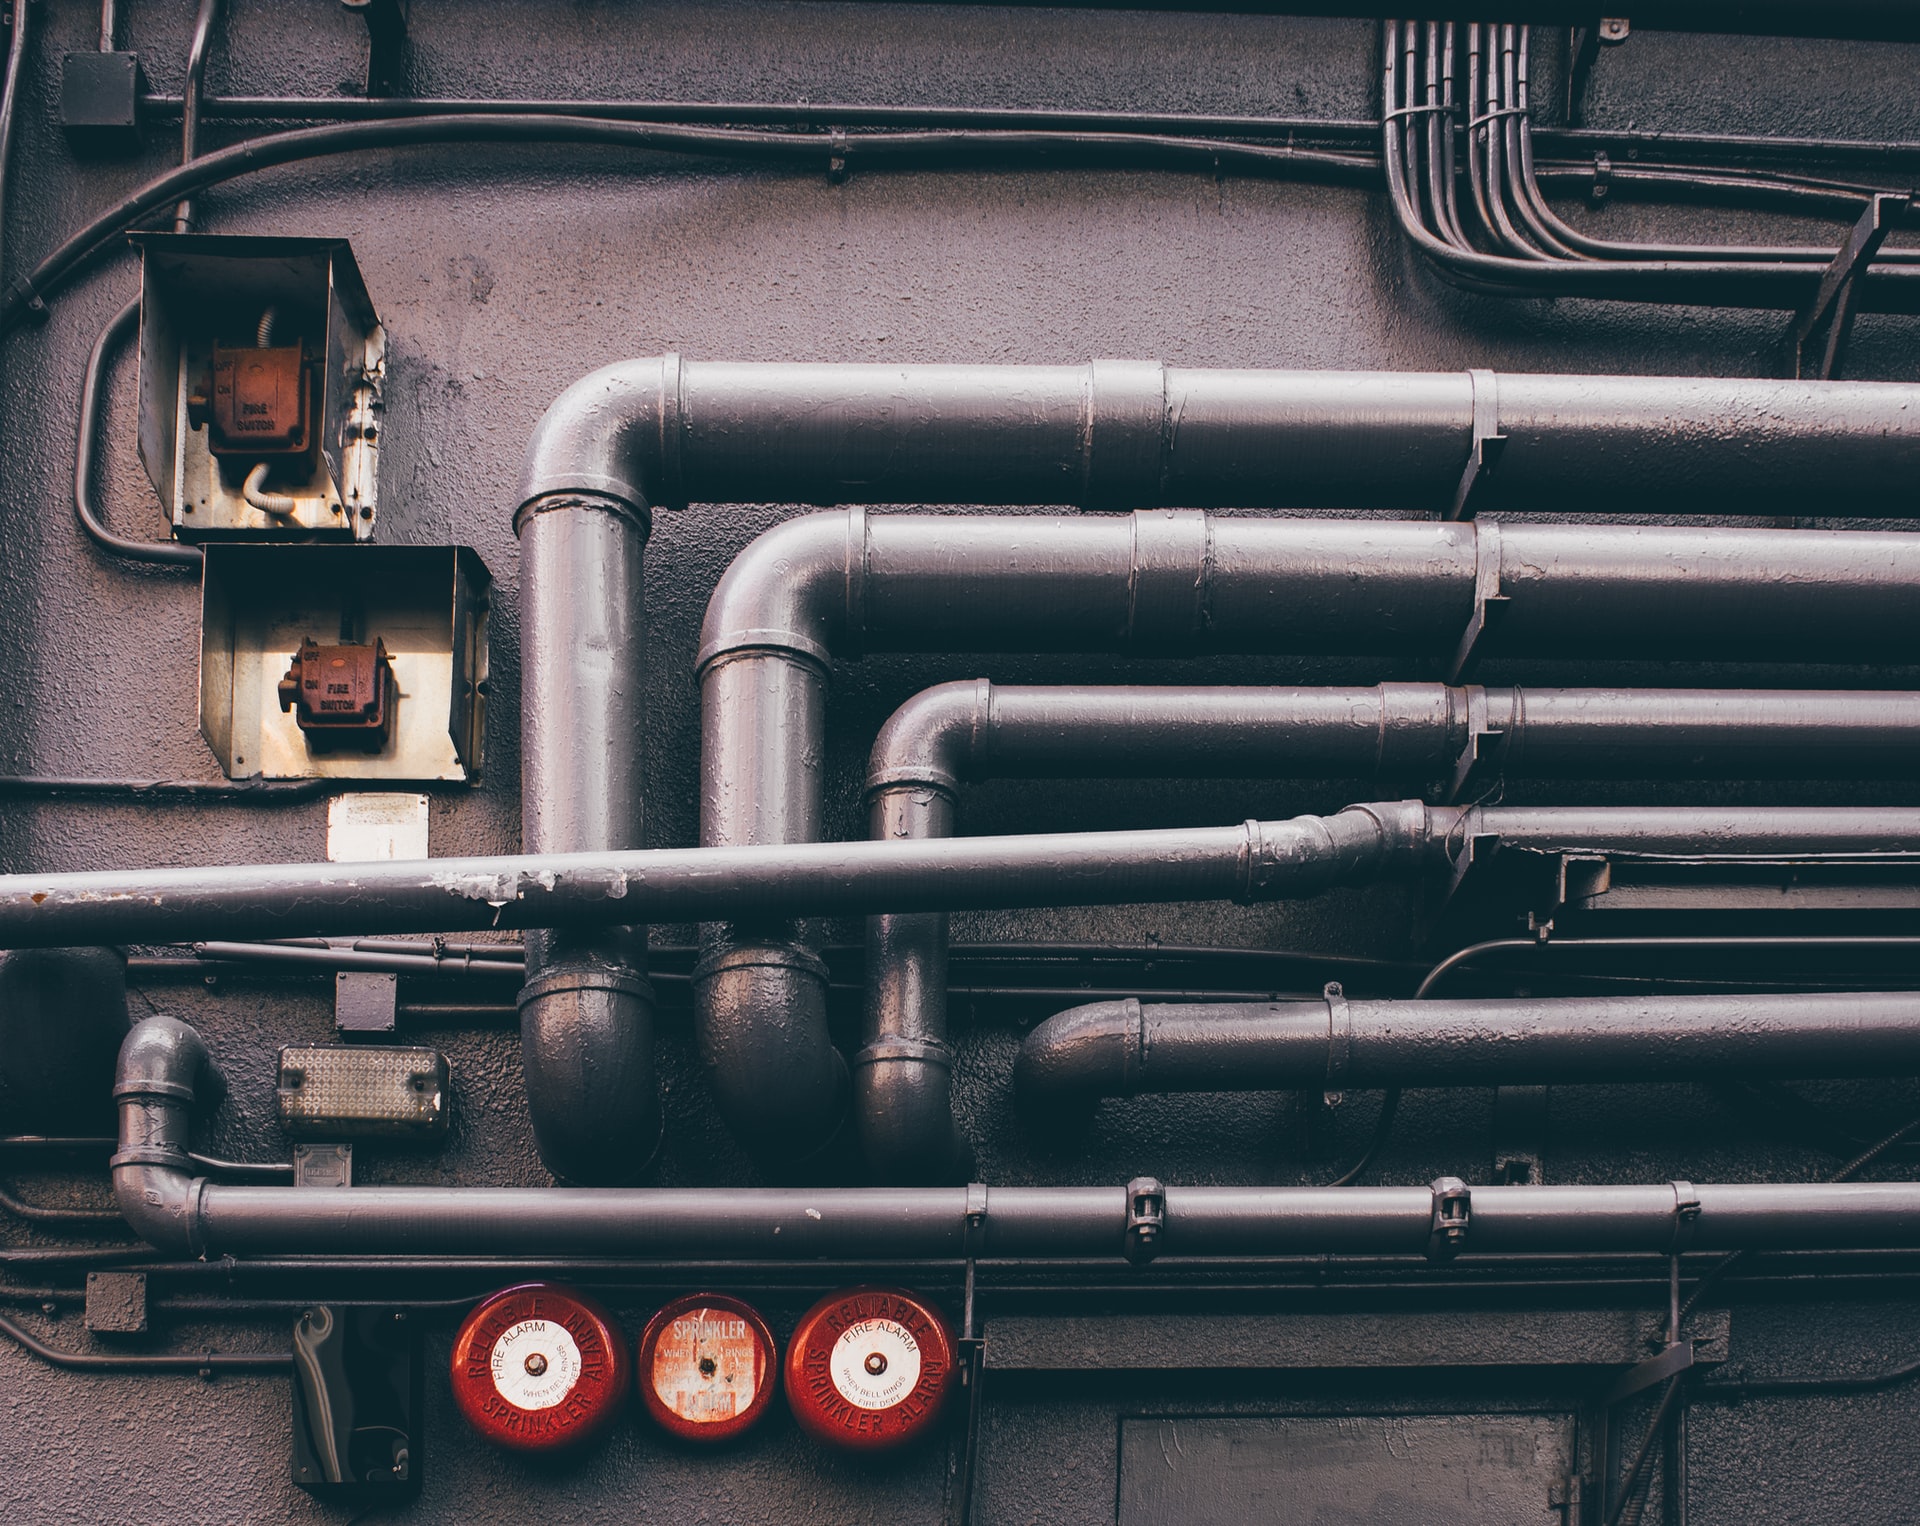 An image of several horizontal pipes, mostly parallel